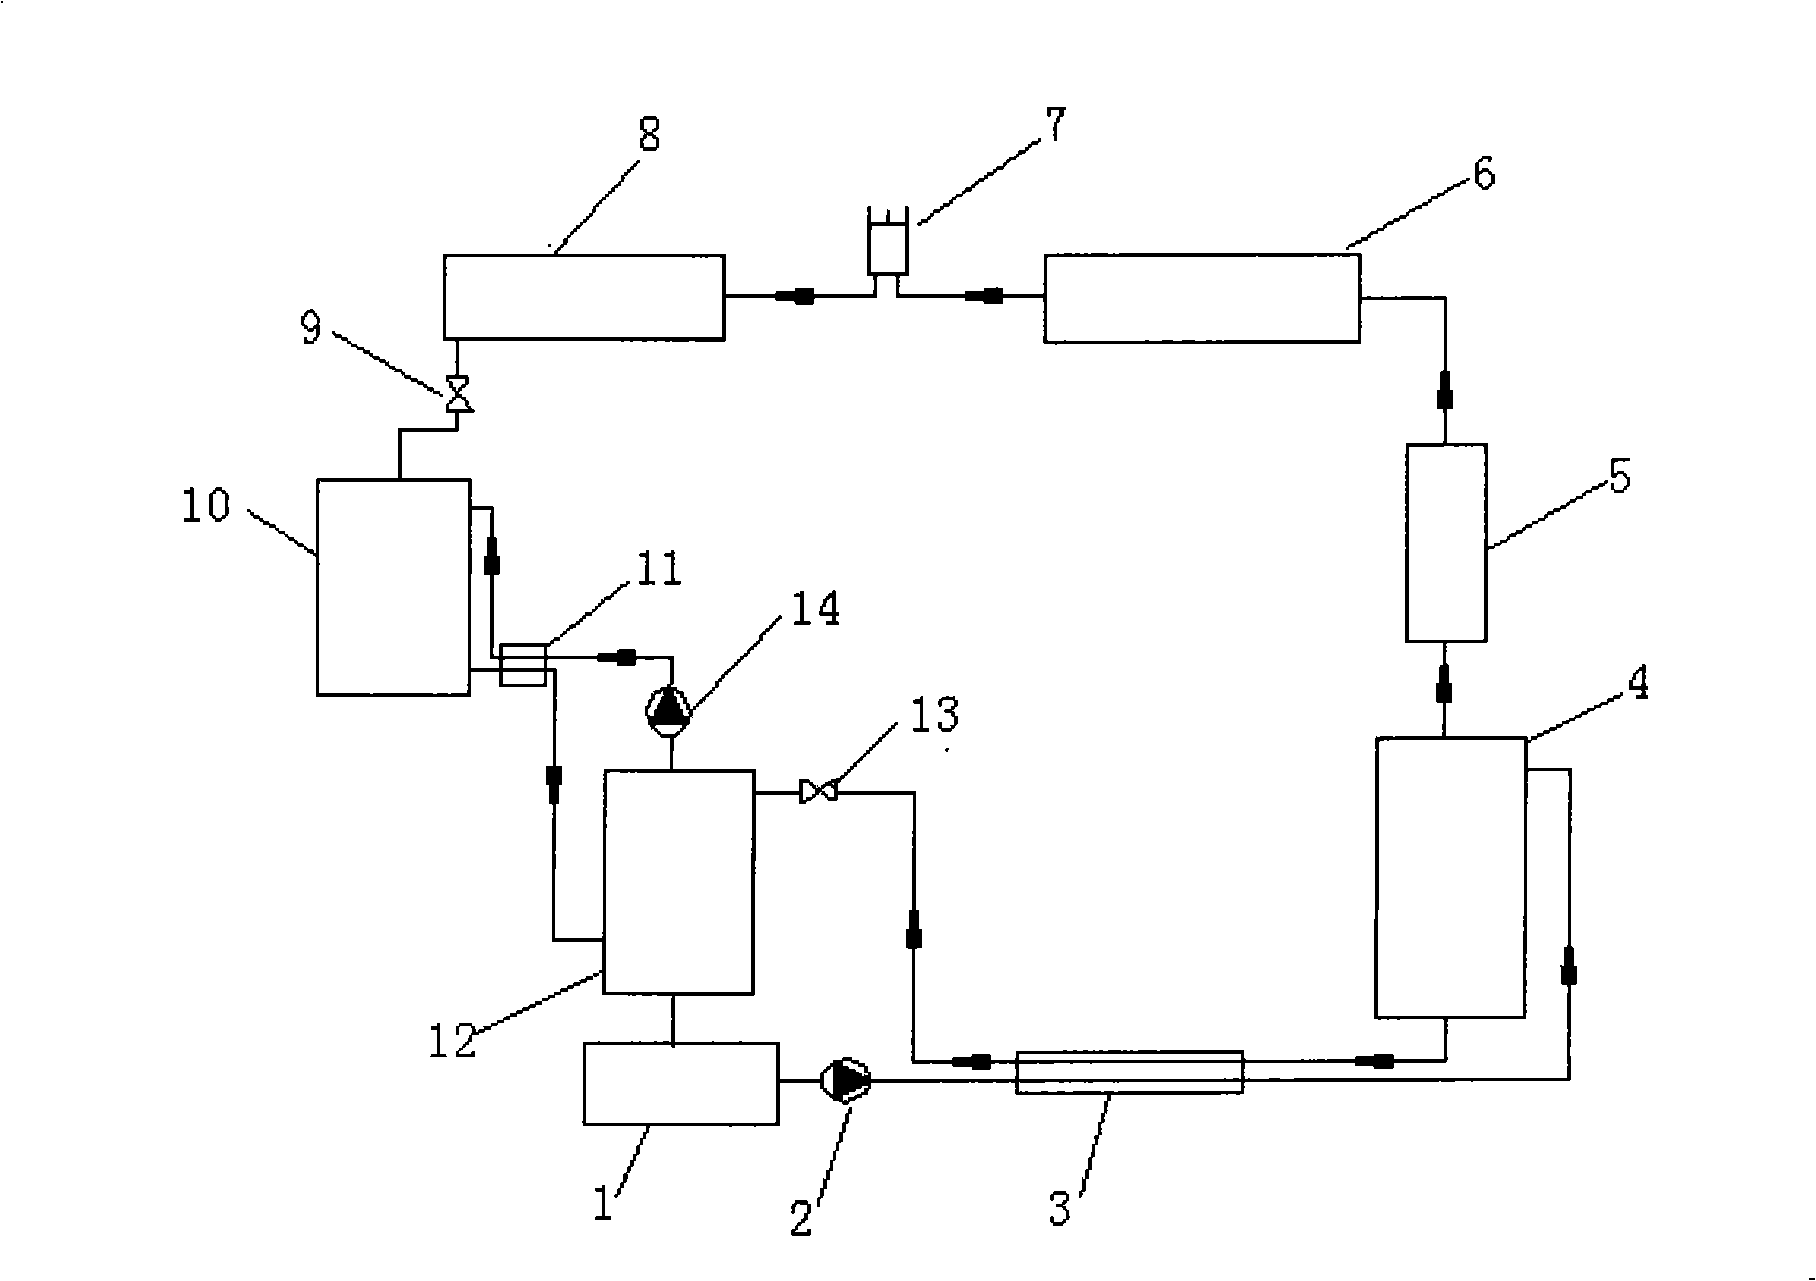 Compression-absorption-diffusion combined refrigerating plant and its refrigeration cycle method